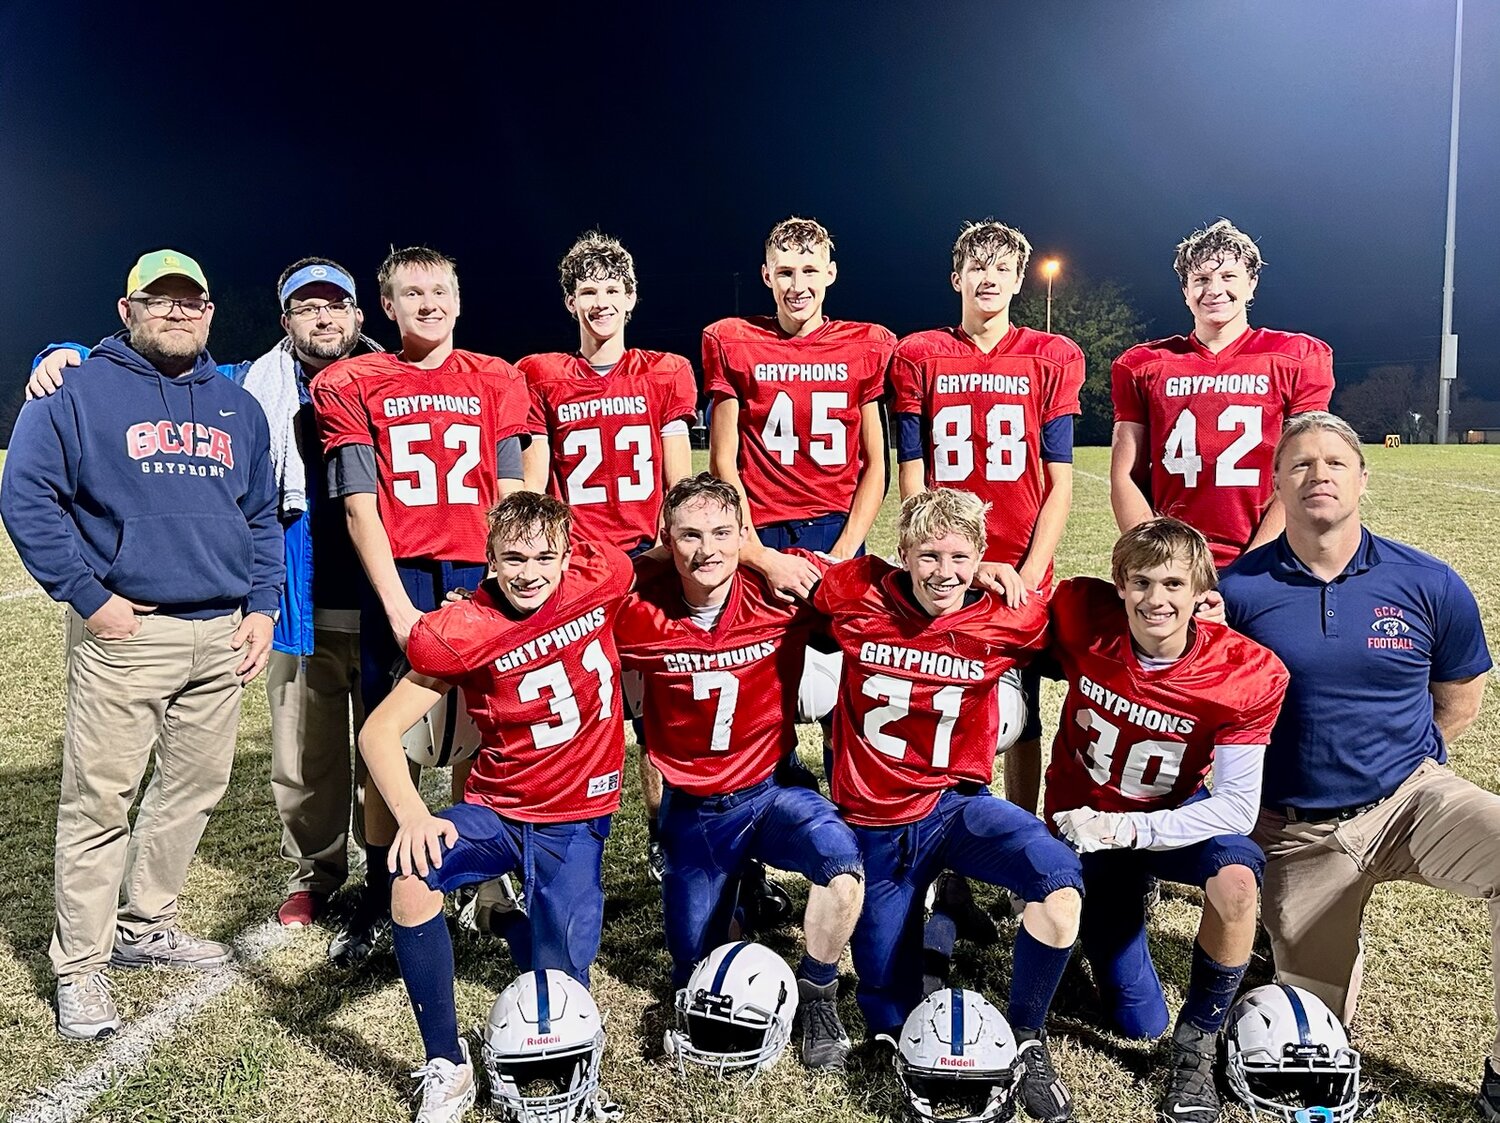 The Grace Classica Christian Academy Gryphons won the Texas Association of Independent Athletic Organizations Division III state championship this past Saturday, defeating Hill County 48-25 in Bryan. Pictured are (back row, from left) head coach Brett Cain, offensive coach Ryan Ray, Drew Ray (freshman), Bryce Jones (junior), Pierce Thomas (sophomore), Tyce Robshaw (junior), Luke Gjone (senior), (front row) Wyatt Keith (sophomore), Noah Bishop (senior), Hudson Gjone (freshman), Lincoln Dolan (freshman) and defensive coach Jim Gjone.